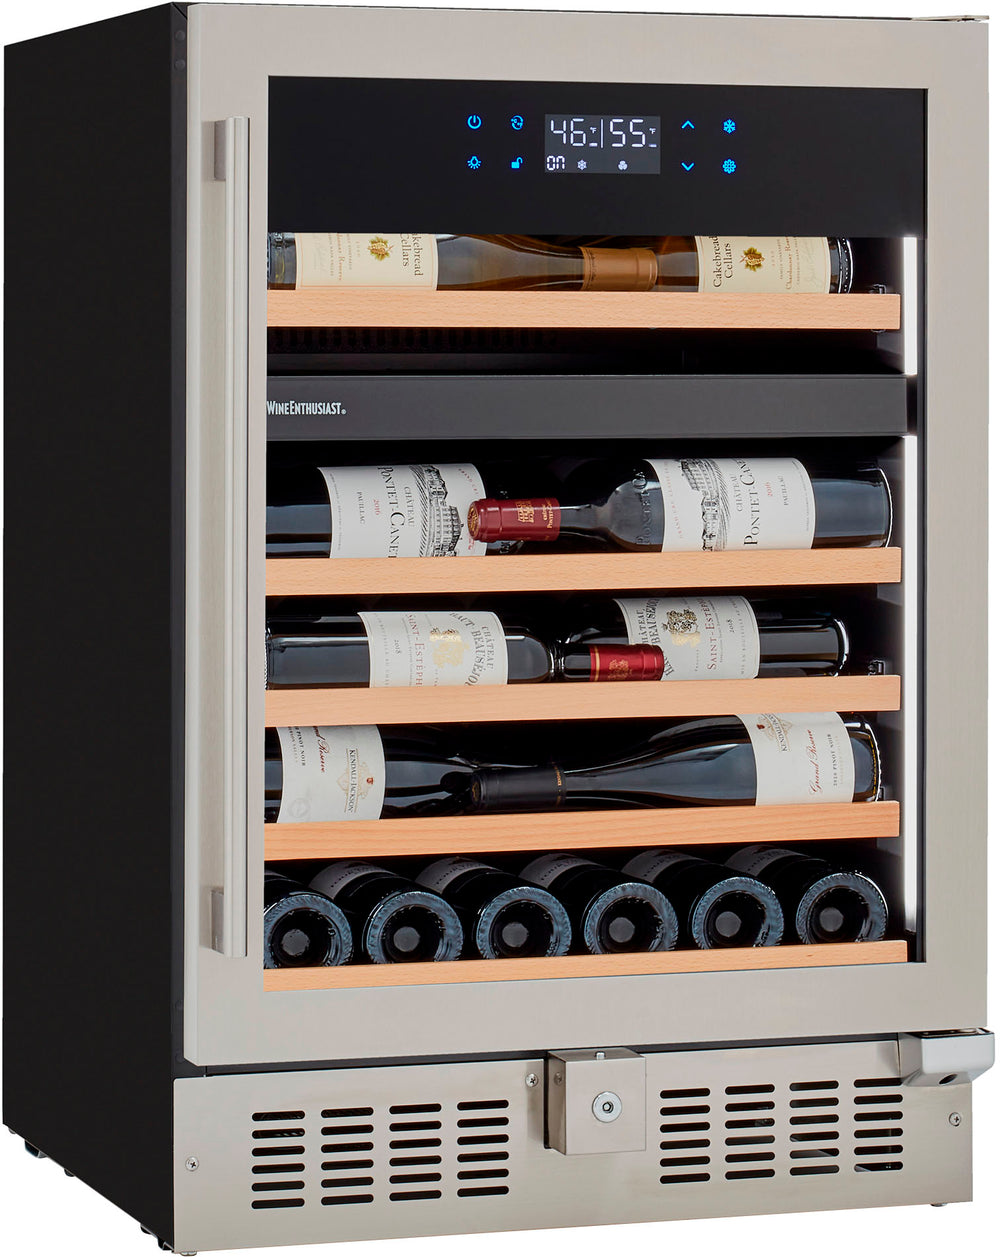 Wine Enthusiast - SommSeries2 46 Bottle Dual Zone with VinoView Display Shelving - Stainless Steel_1